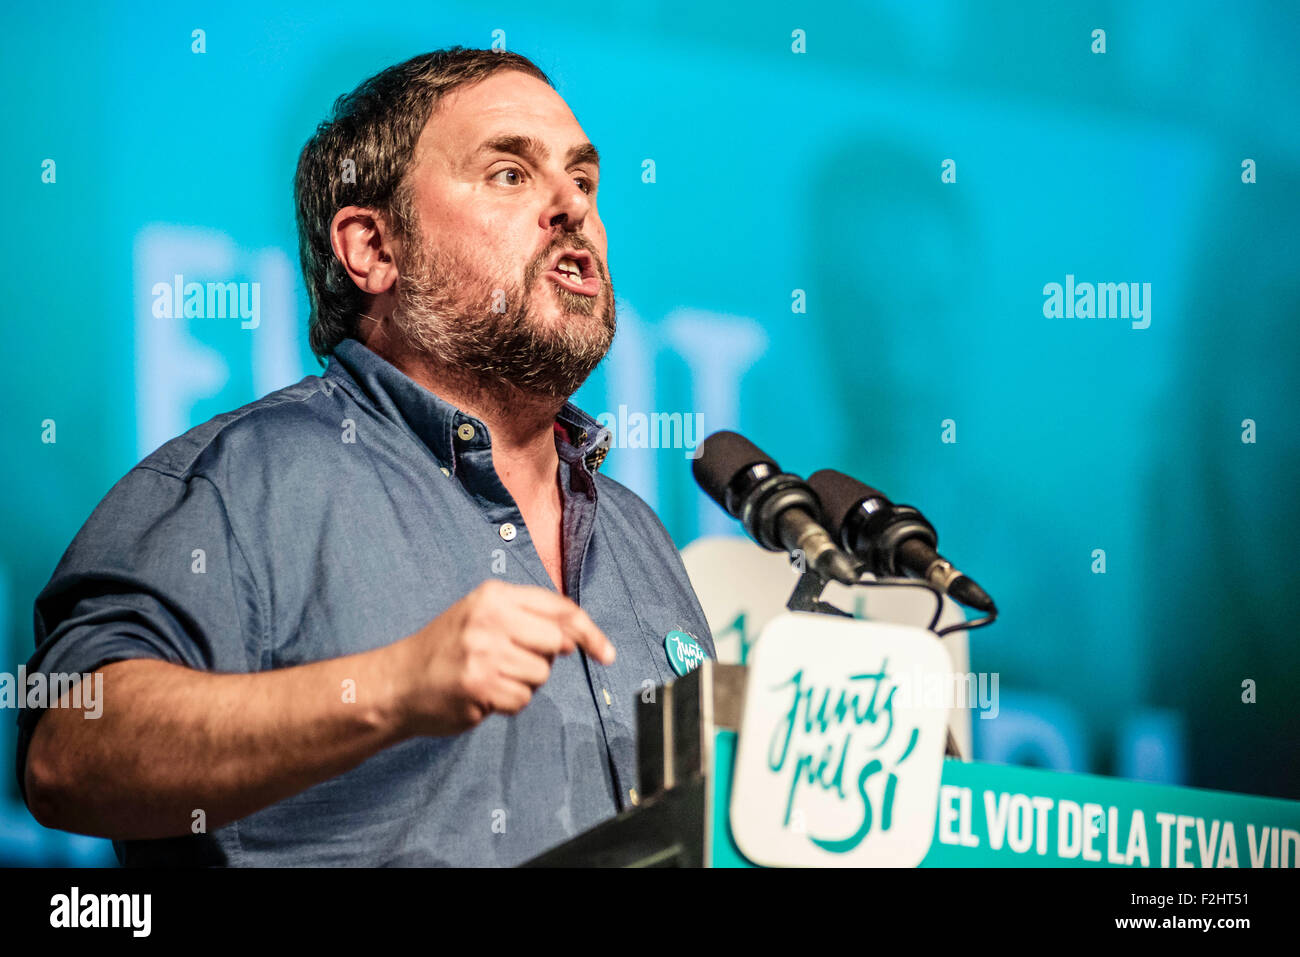 L'Hospitalet, Spain. September 19th, 2015: ORIOL JUNQUERAS, president of the ERC party and number 5 of the pro-independence cross-party electoral list 'Junts pel Si' (Together for the yes) delivers a lively speech during the platforms central campaign act in L'Hospitalet de Llobregat. Credit:  matthi/Alamy Live News Stock Photo